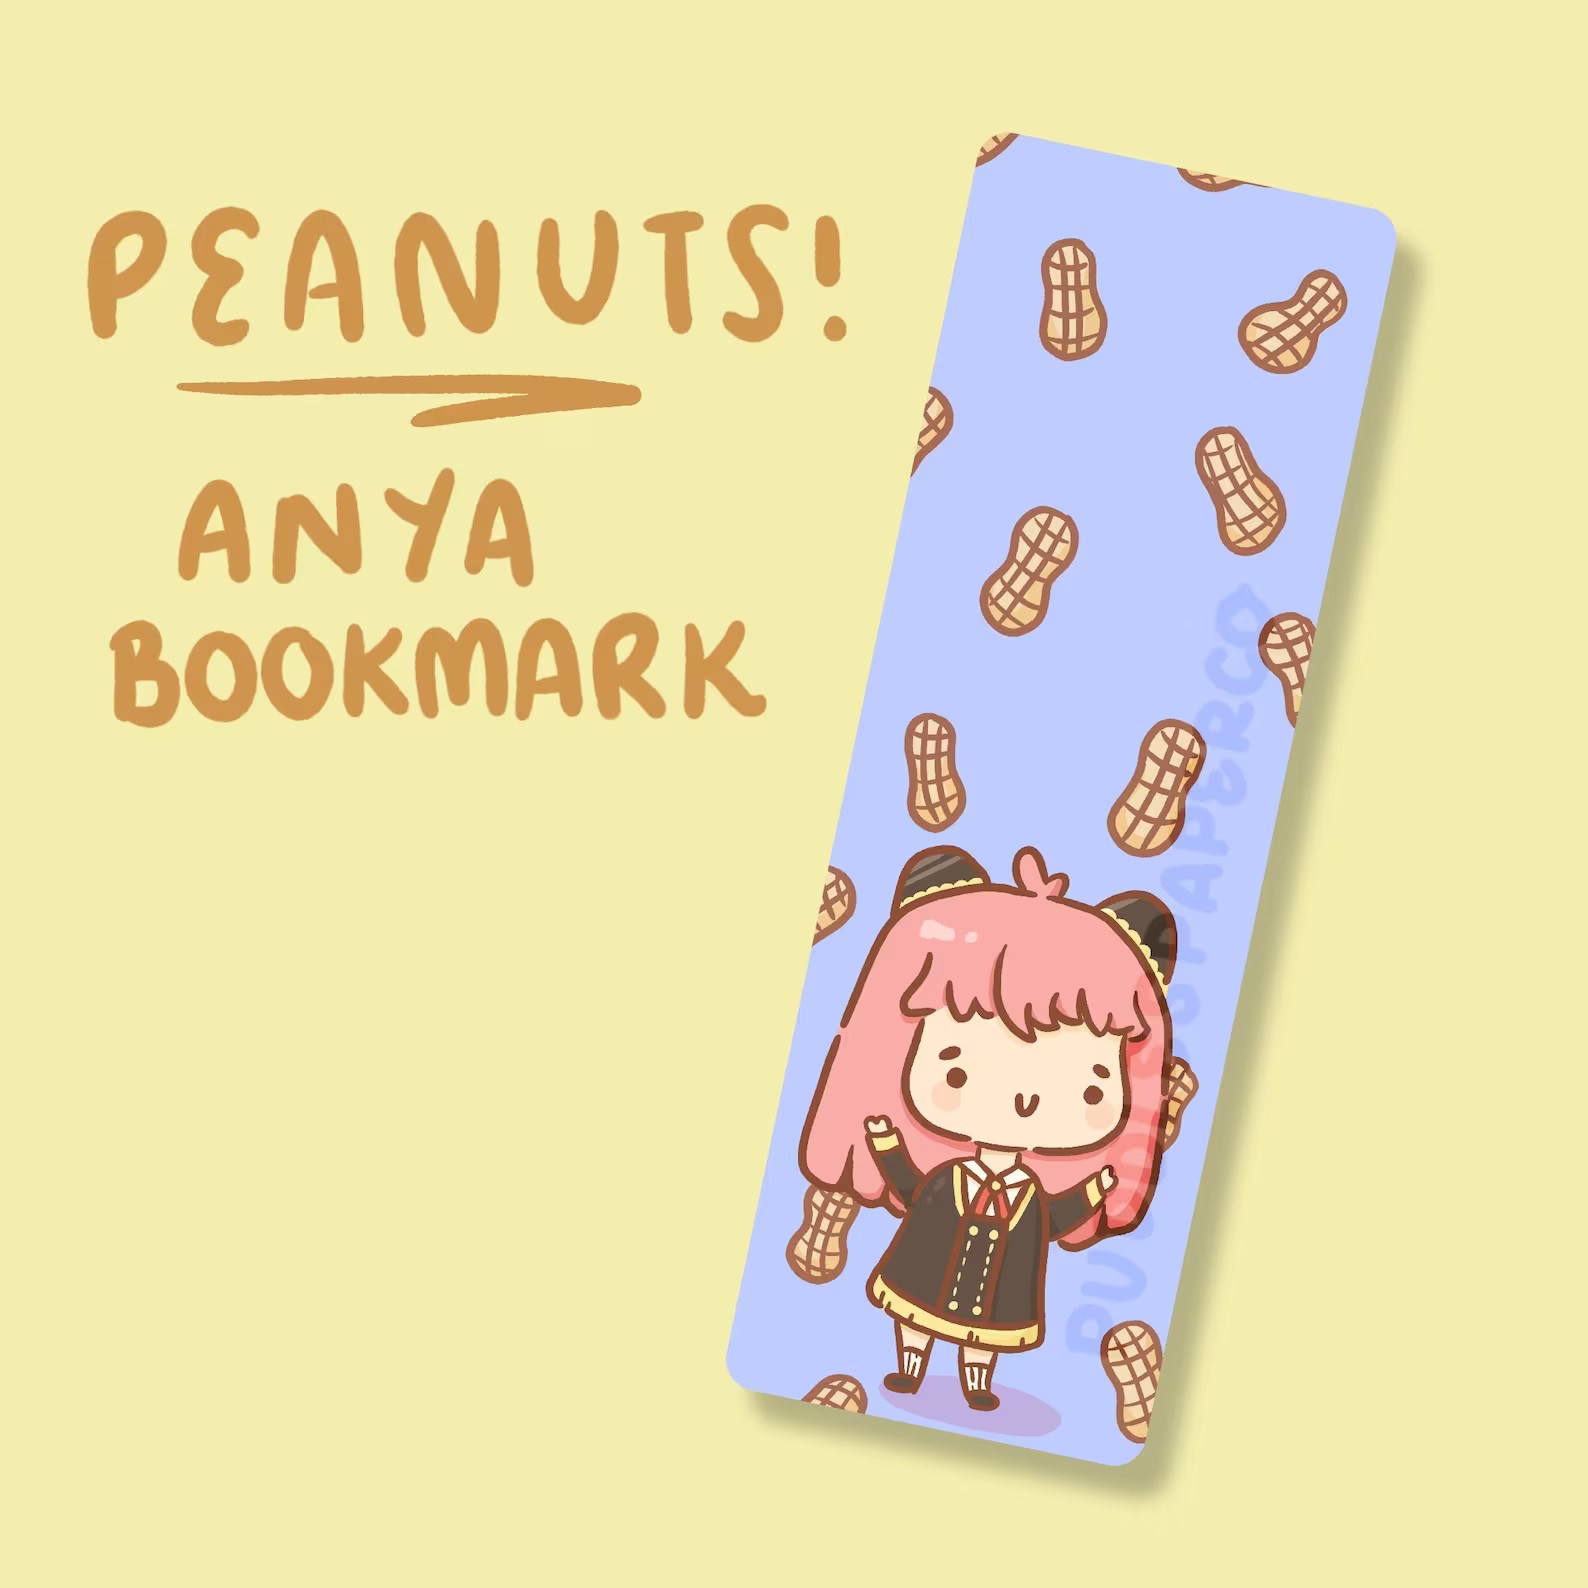 A blue bookmark featuring a chibi Anya from Spy x Family. She is smiling with her hands up in the air as peanuts ran down in the background.